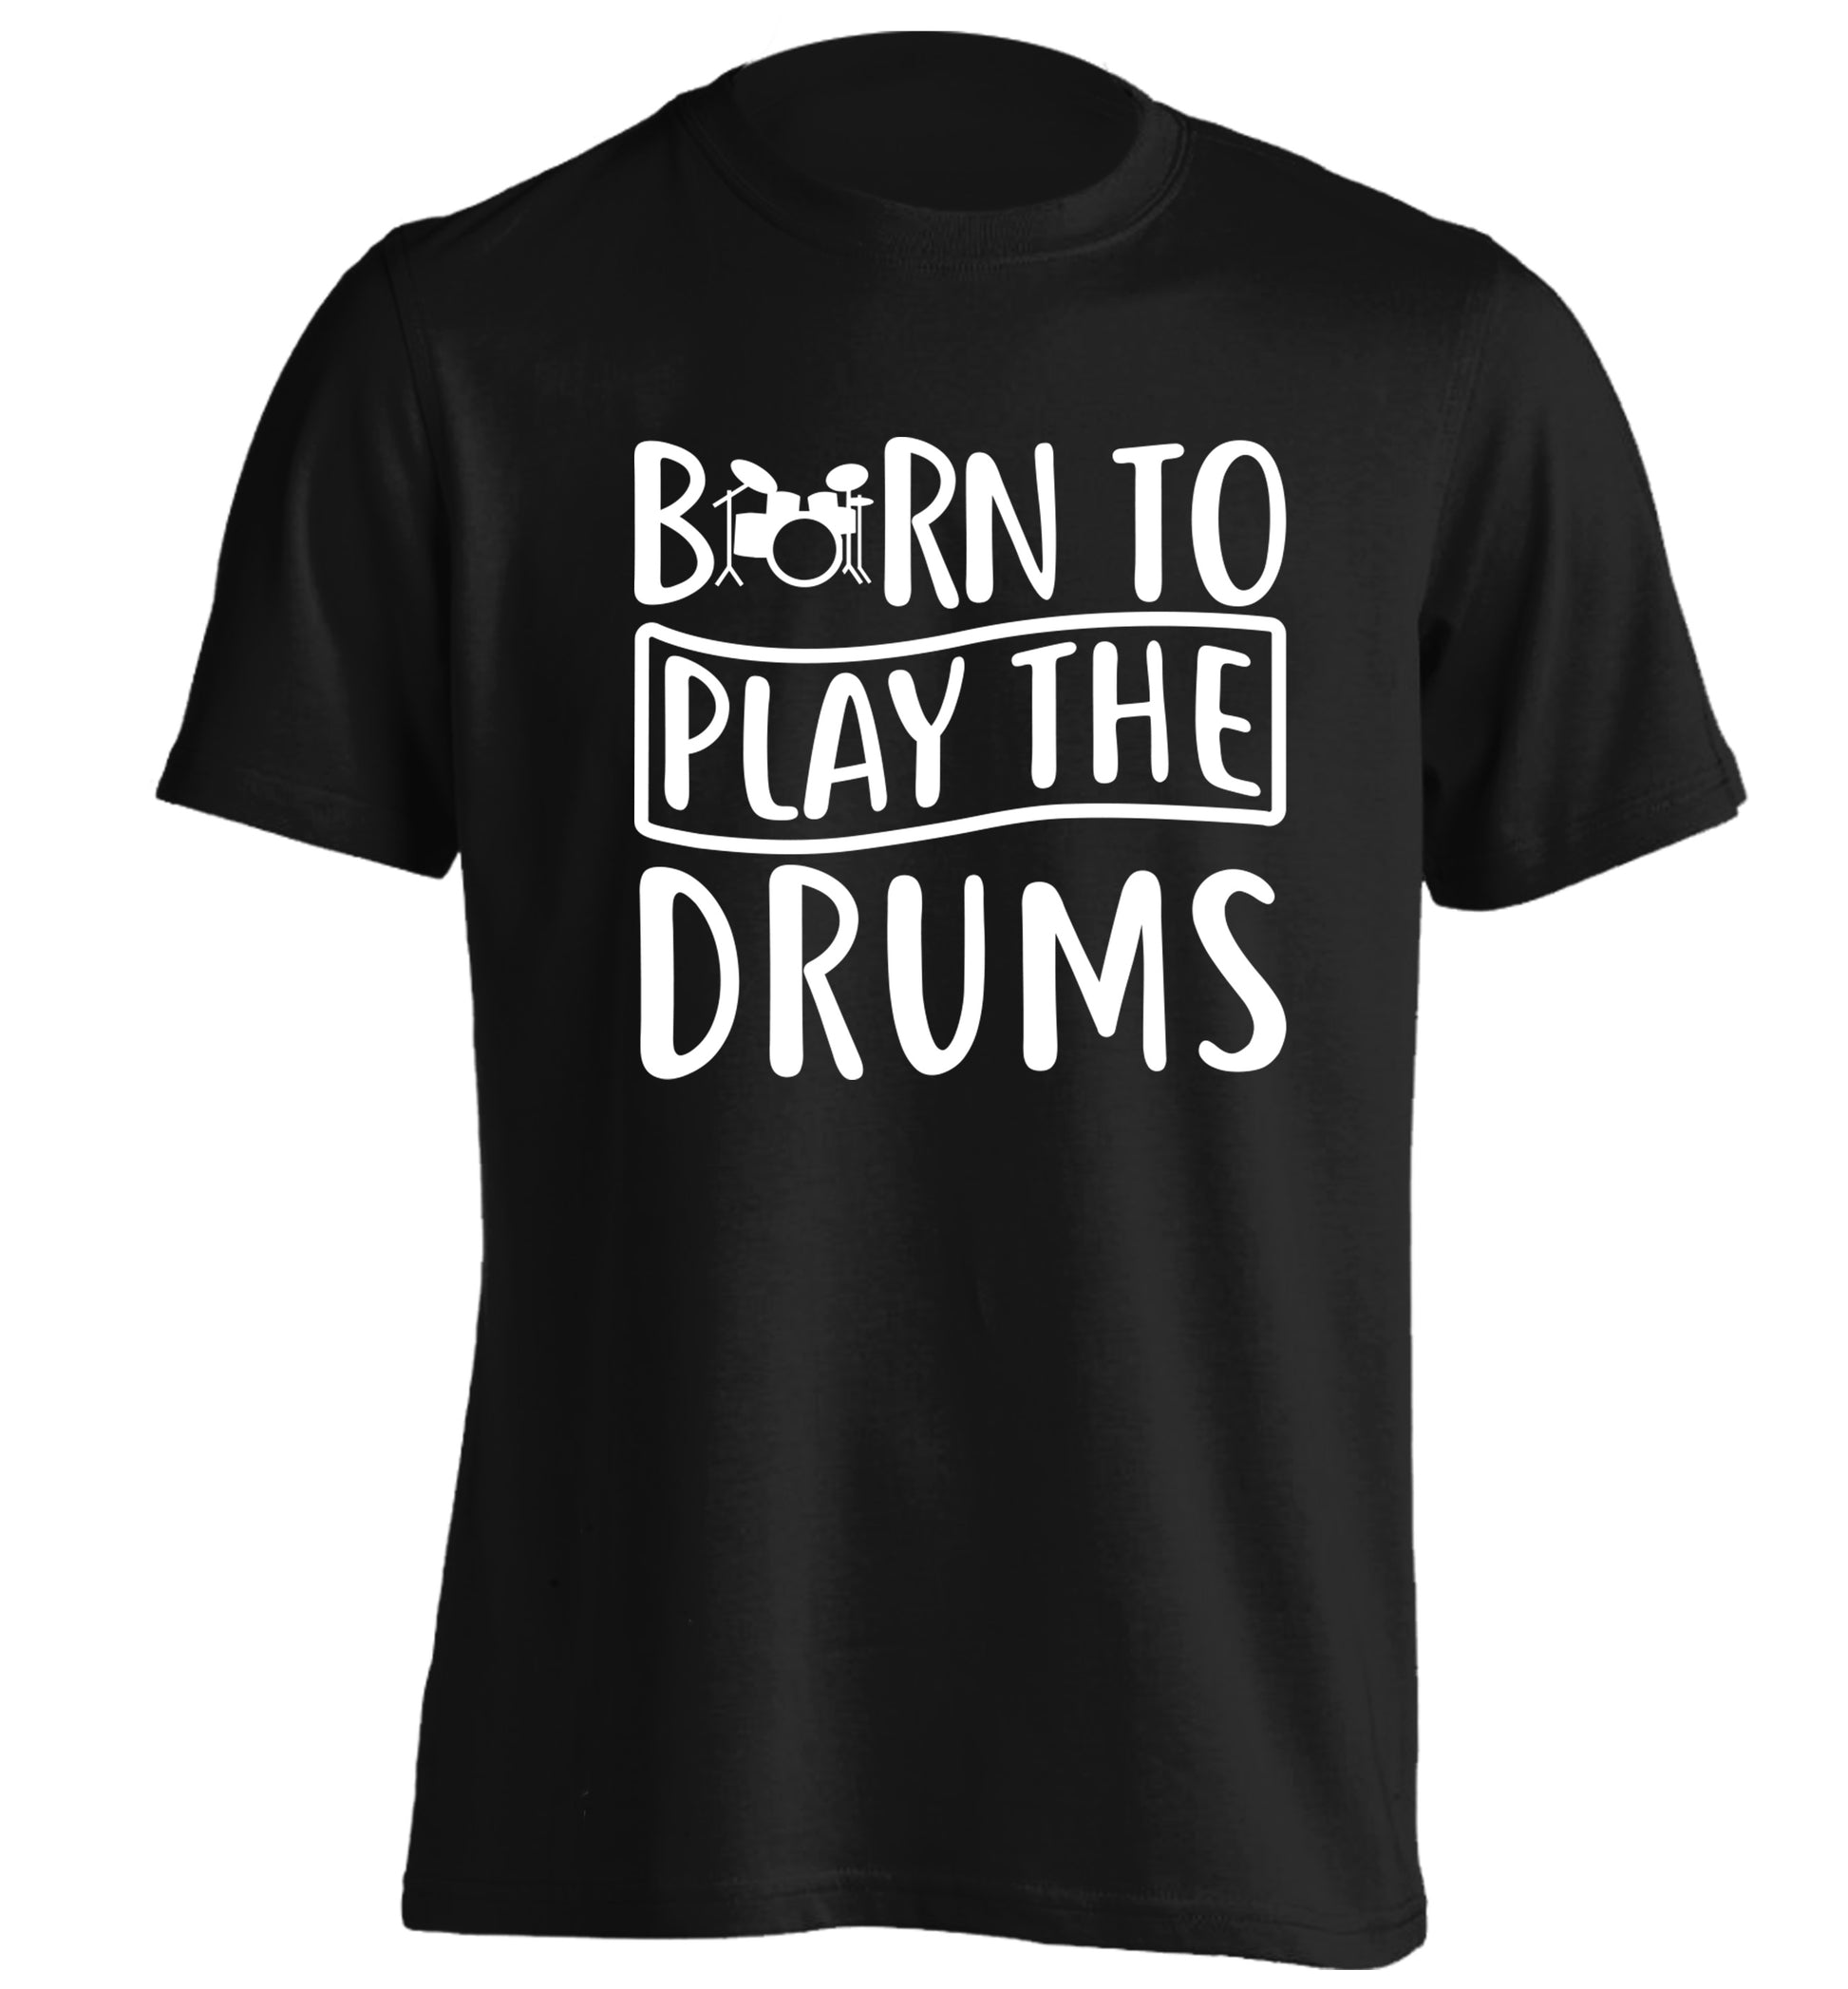 Born to play the drums adults unisex black Tshirt 2XL